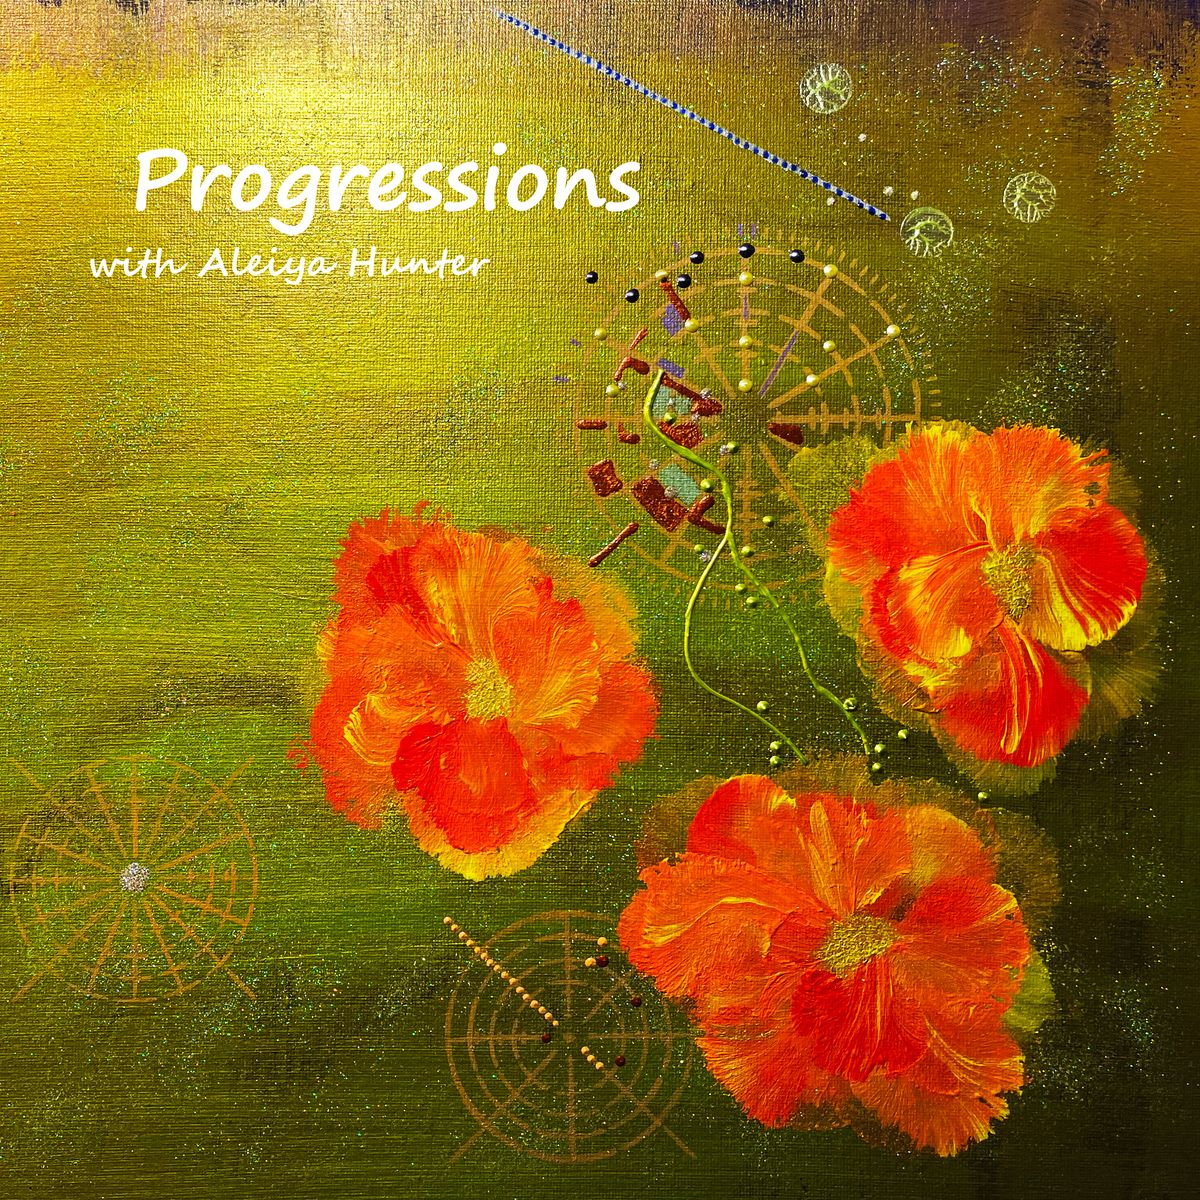 The Progressions on Audio Series & Feature Benefits